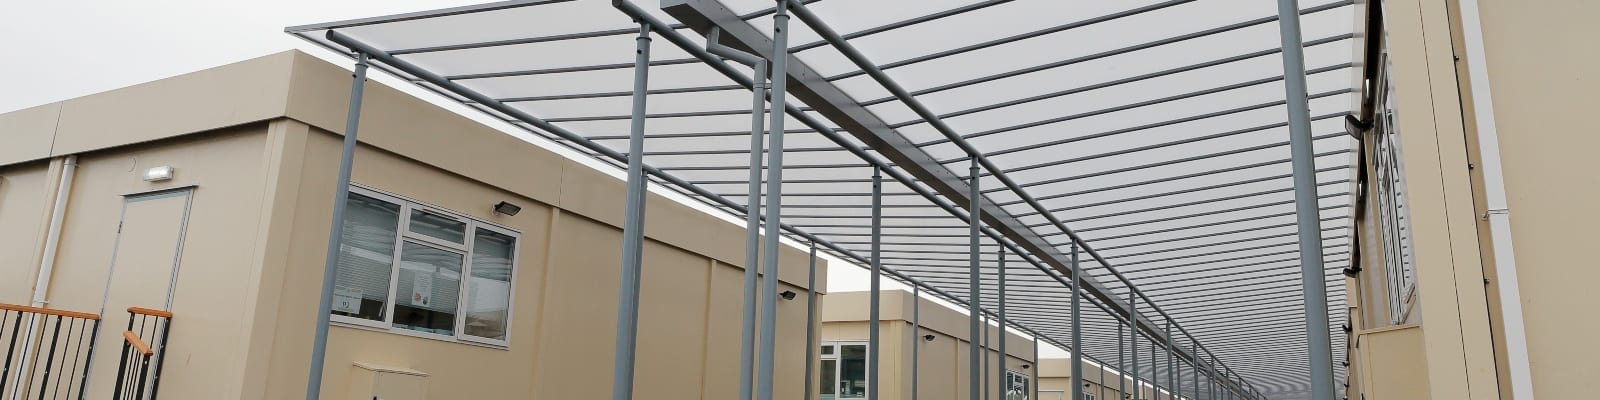 Newman School Straight Roof Shelters